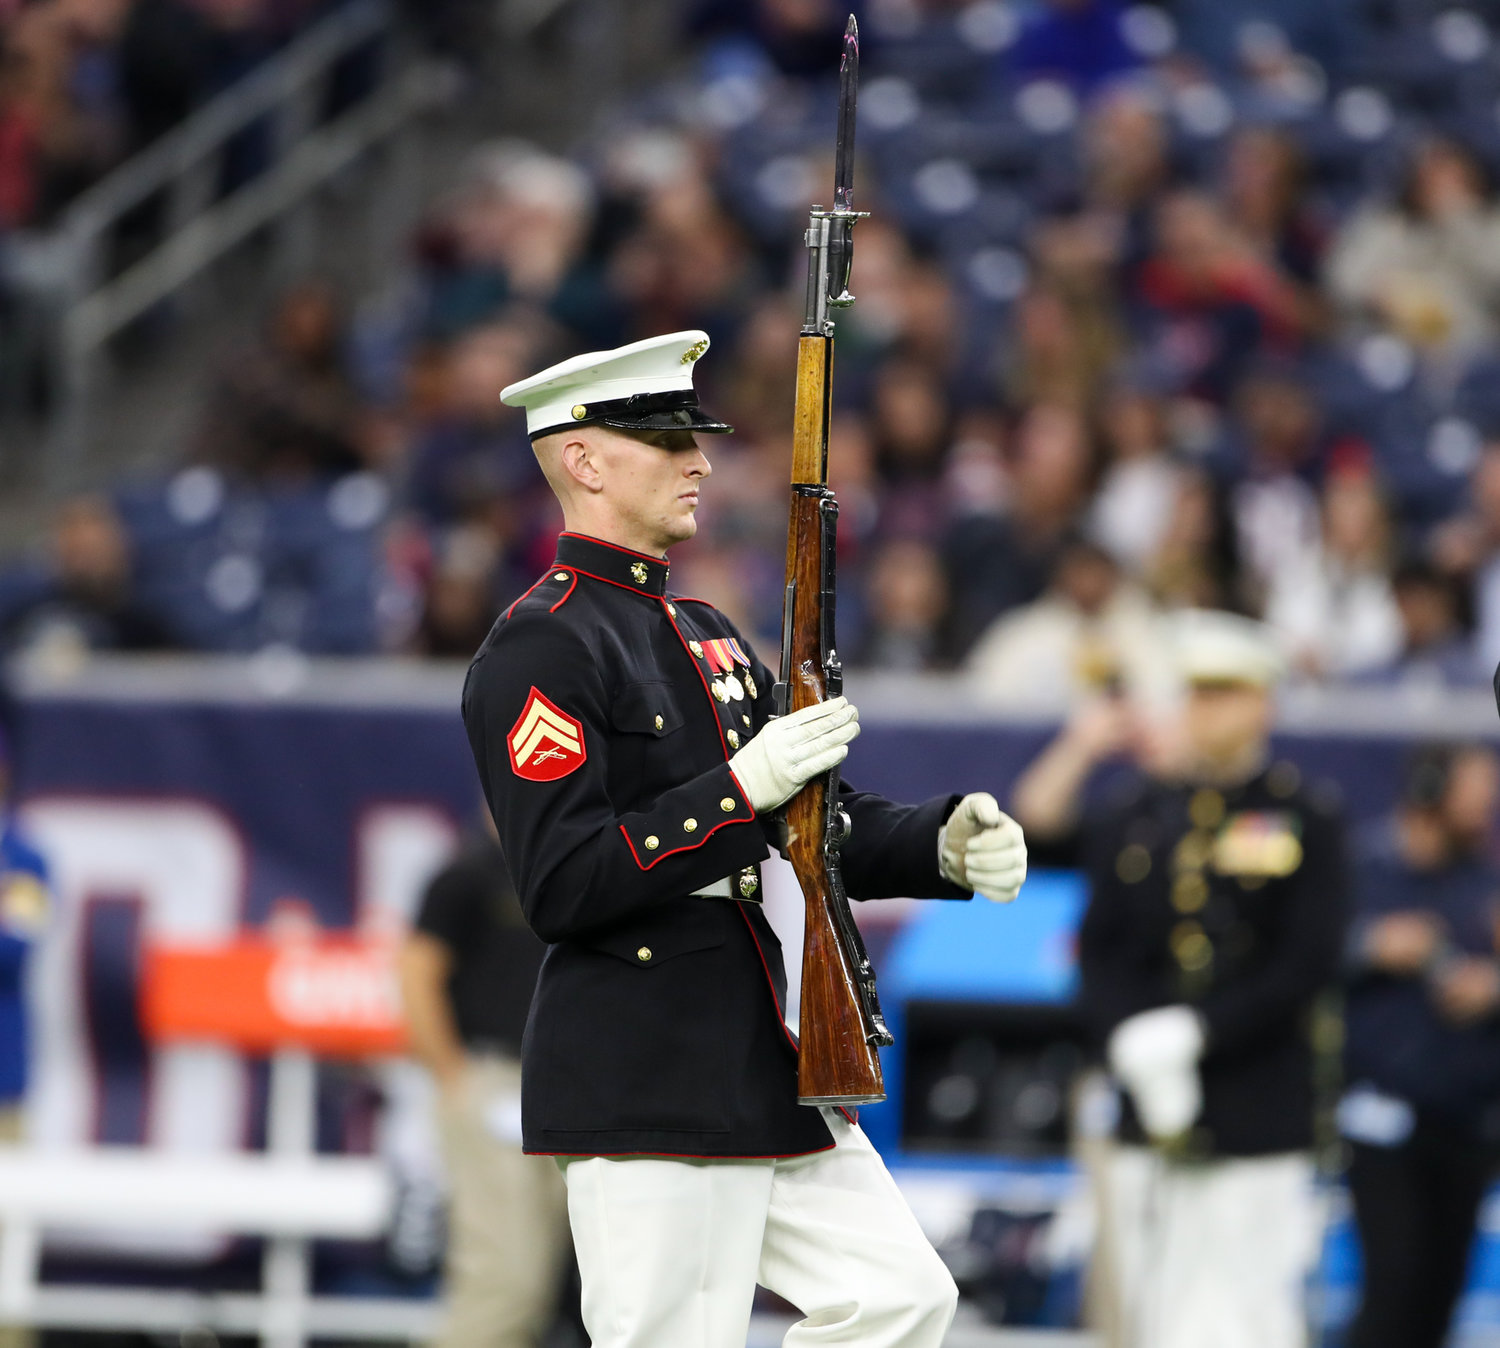 The United States Marine Corps Silent Drill Platoon performs during halftime at an NFL game between the Houston Texans and the New York Jets on November 28, 2021 in Houston, Texas.